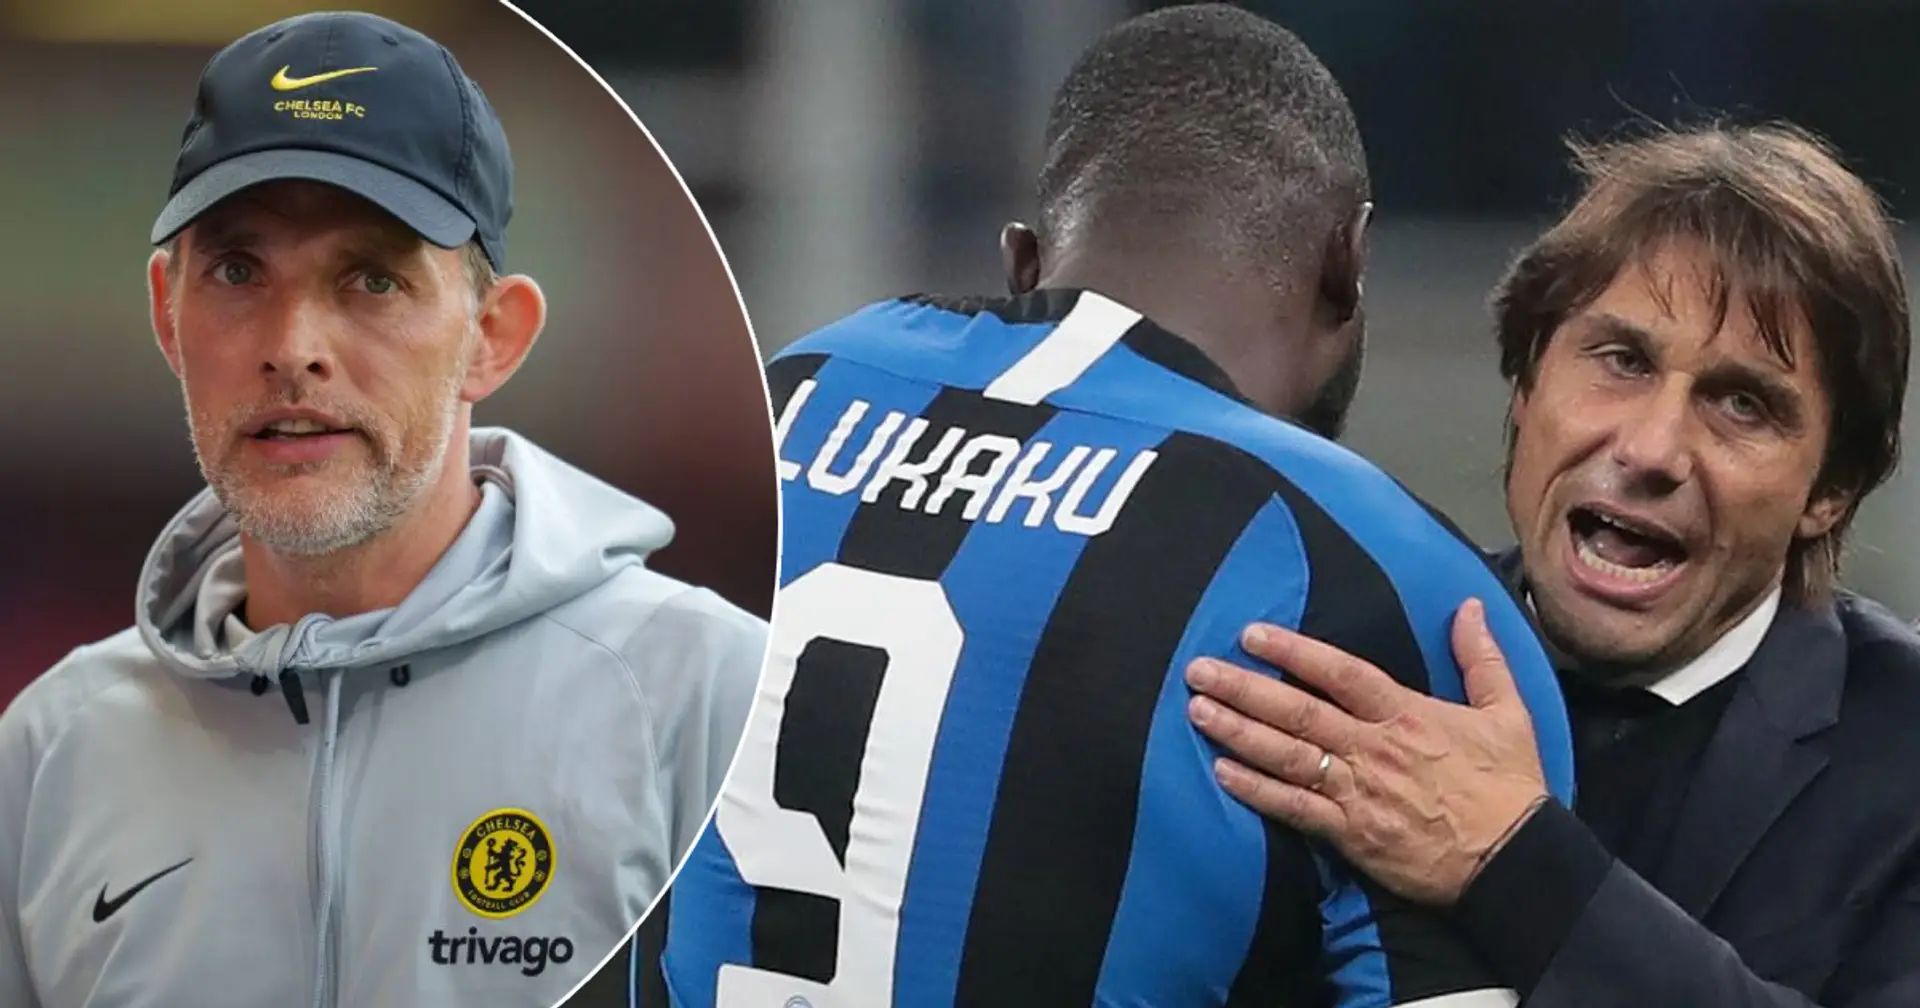 How Conte made 2 changes that transformed Lukaku from a Chelsea reject to a €100m signing